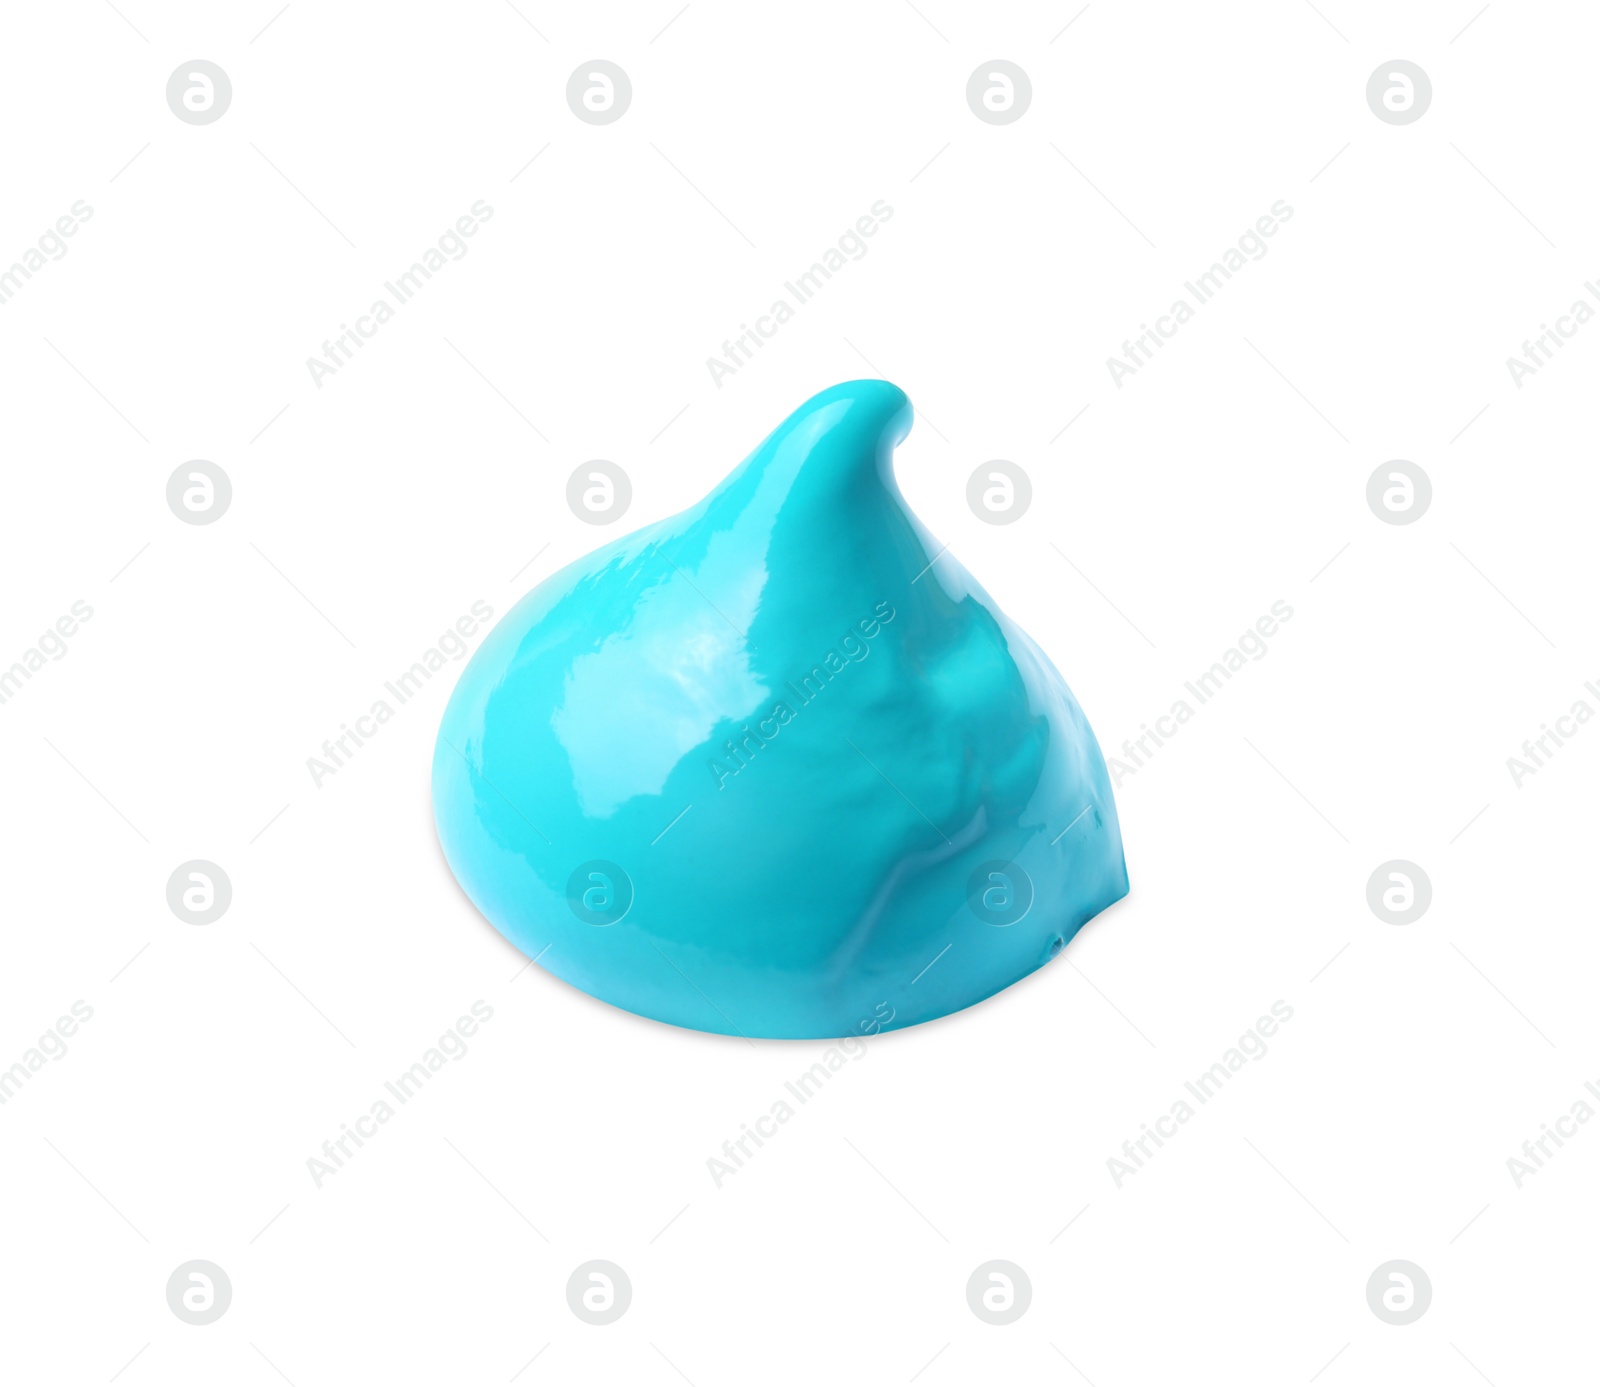 Photo of Sample of turquoise paint on white background